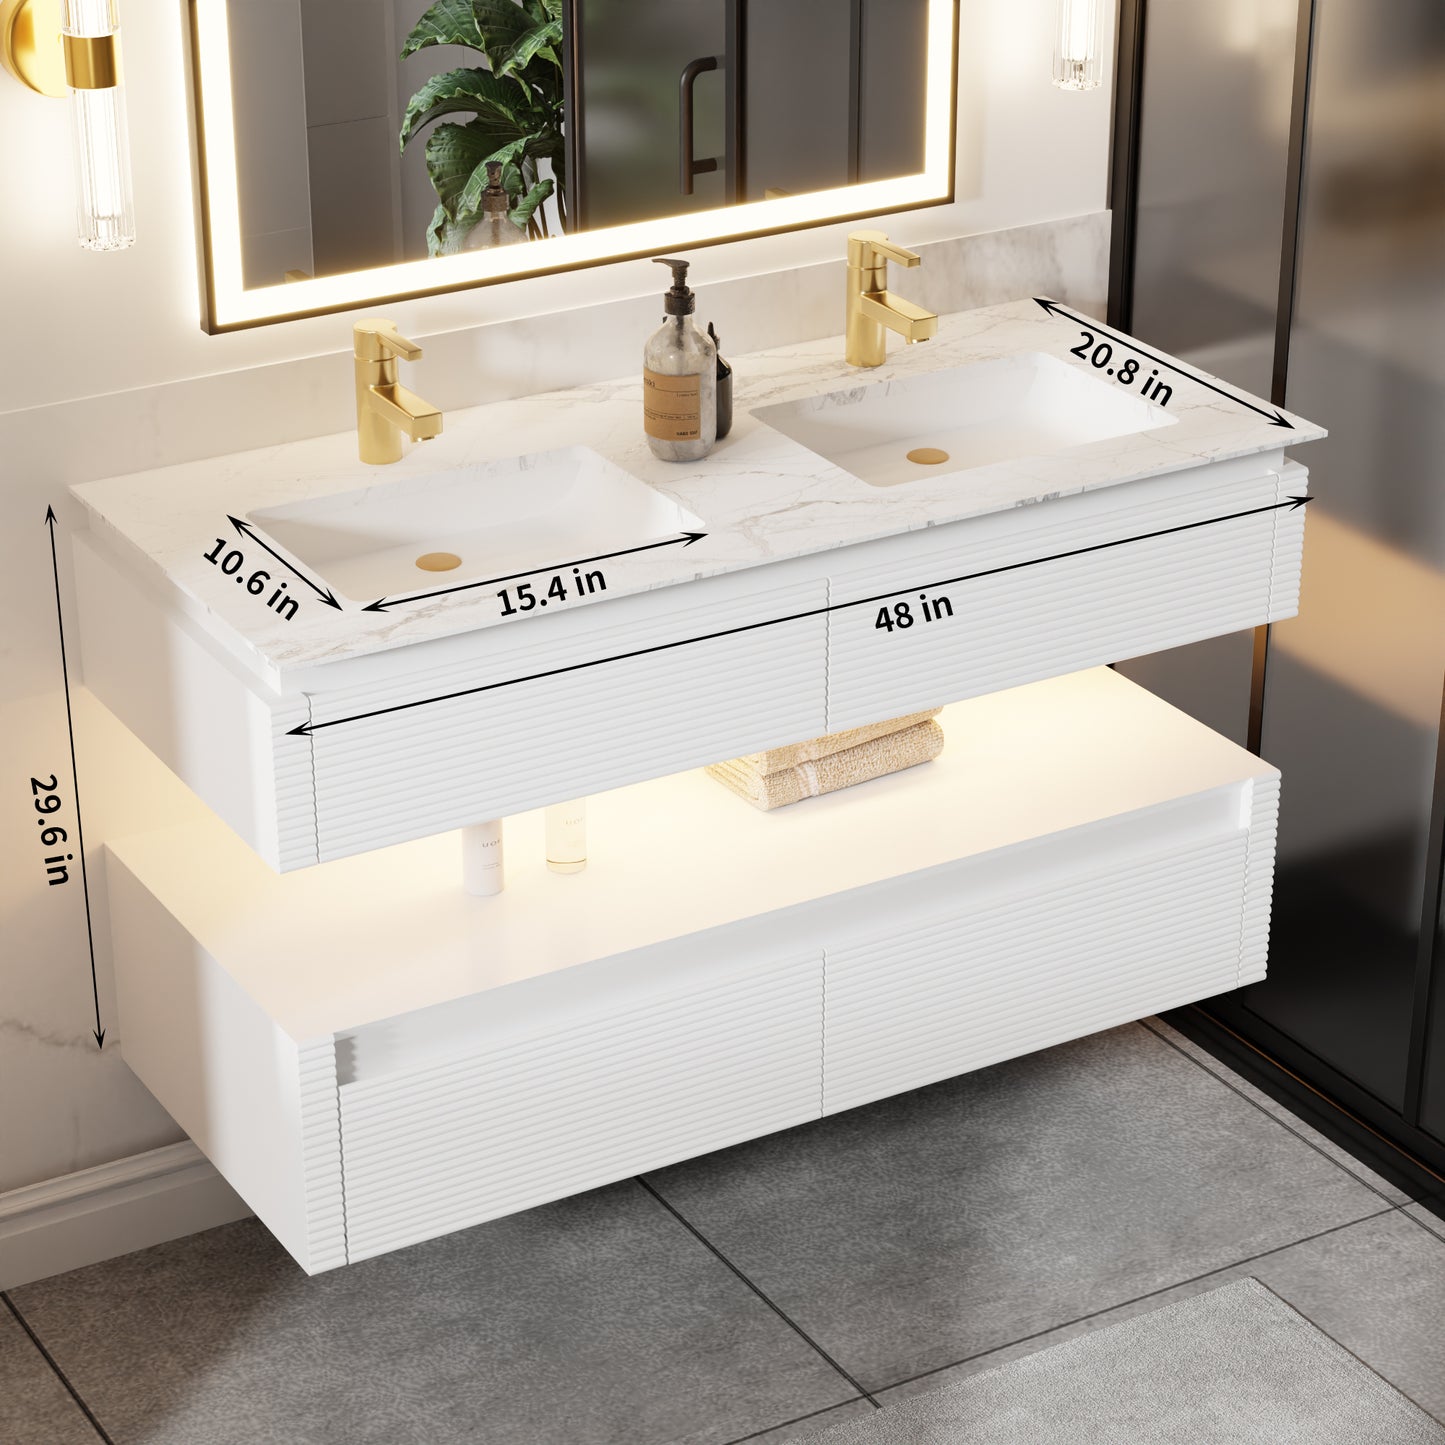 Segeo 48" Modern Solid Oak Floating Bathroom Vanity Cabinet White with Lights and Marble Countertop, Dual Basins